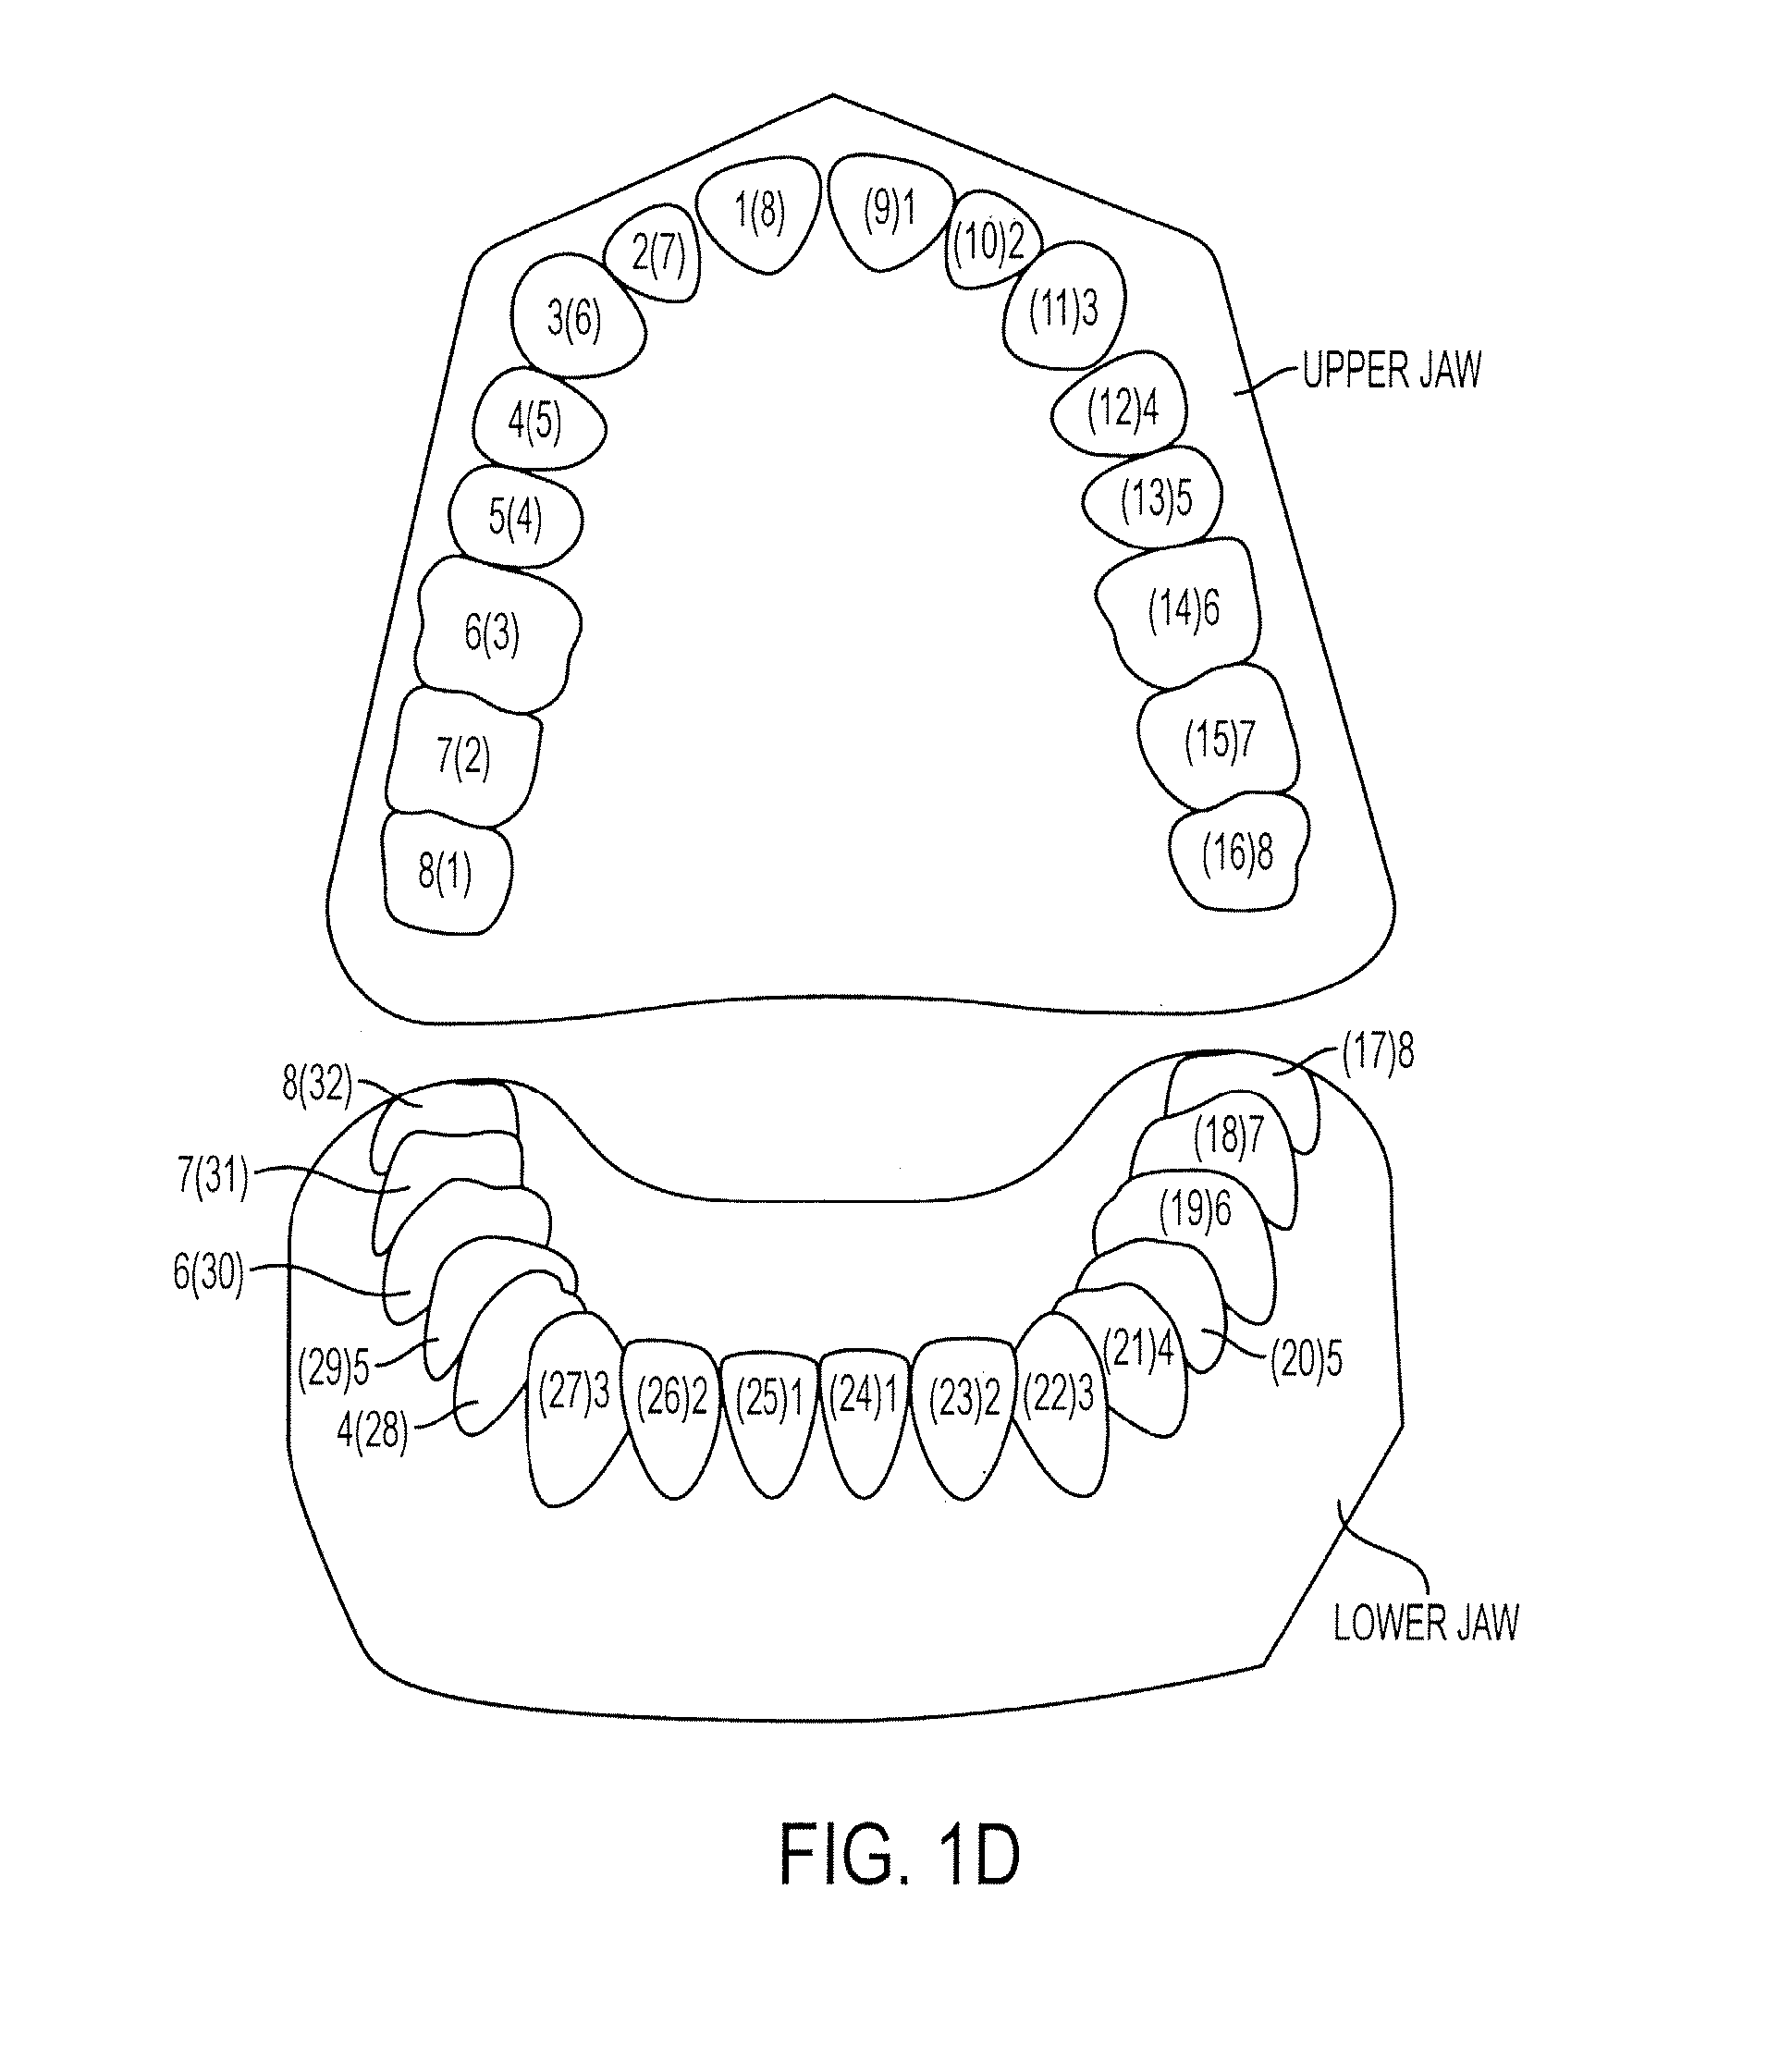 Automated treatment staging for teeth